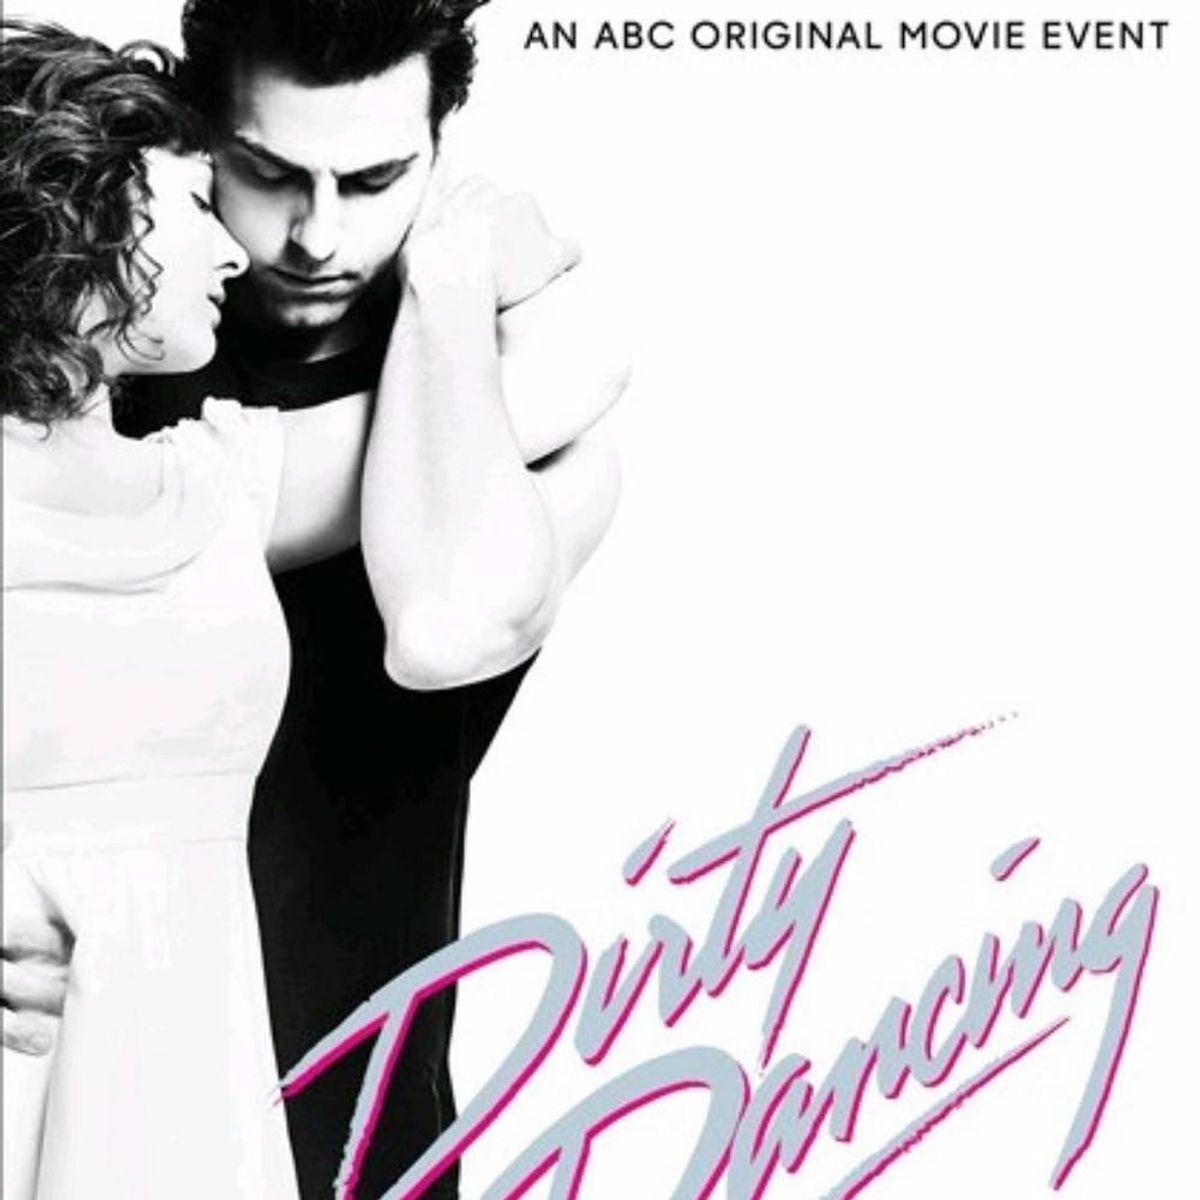 The New ‘Dirty Dancing’ Trailer Is Here: Discuss